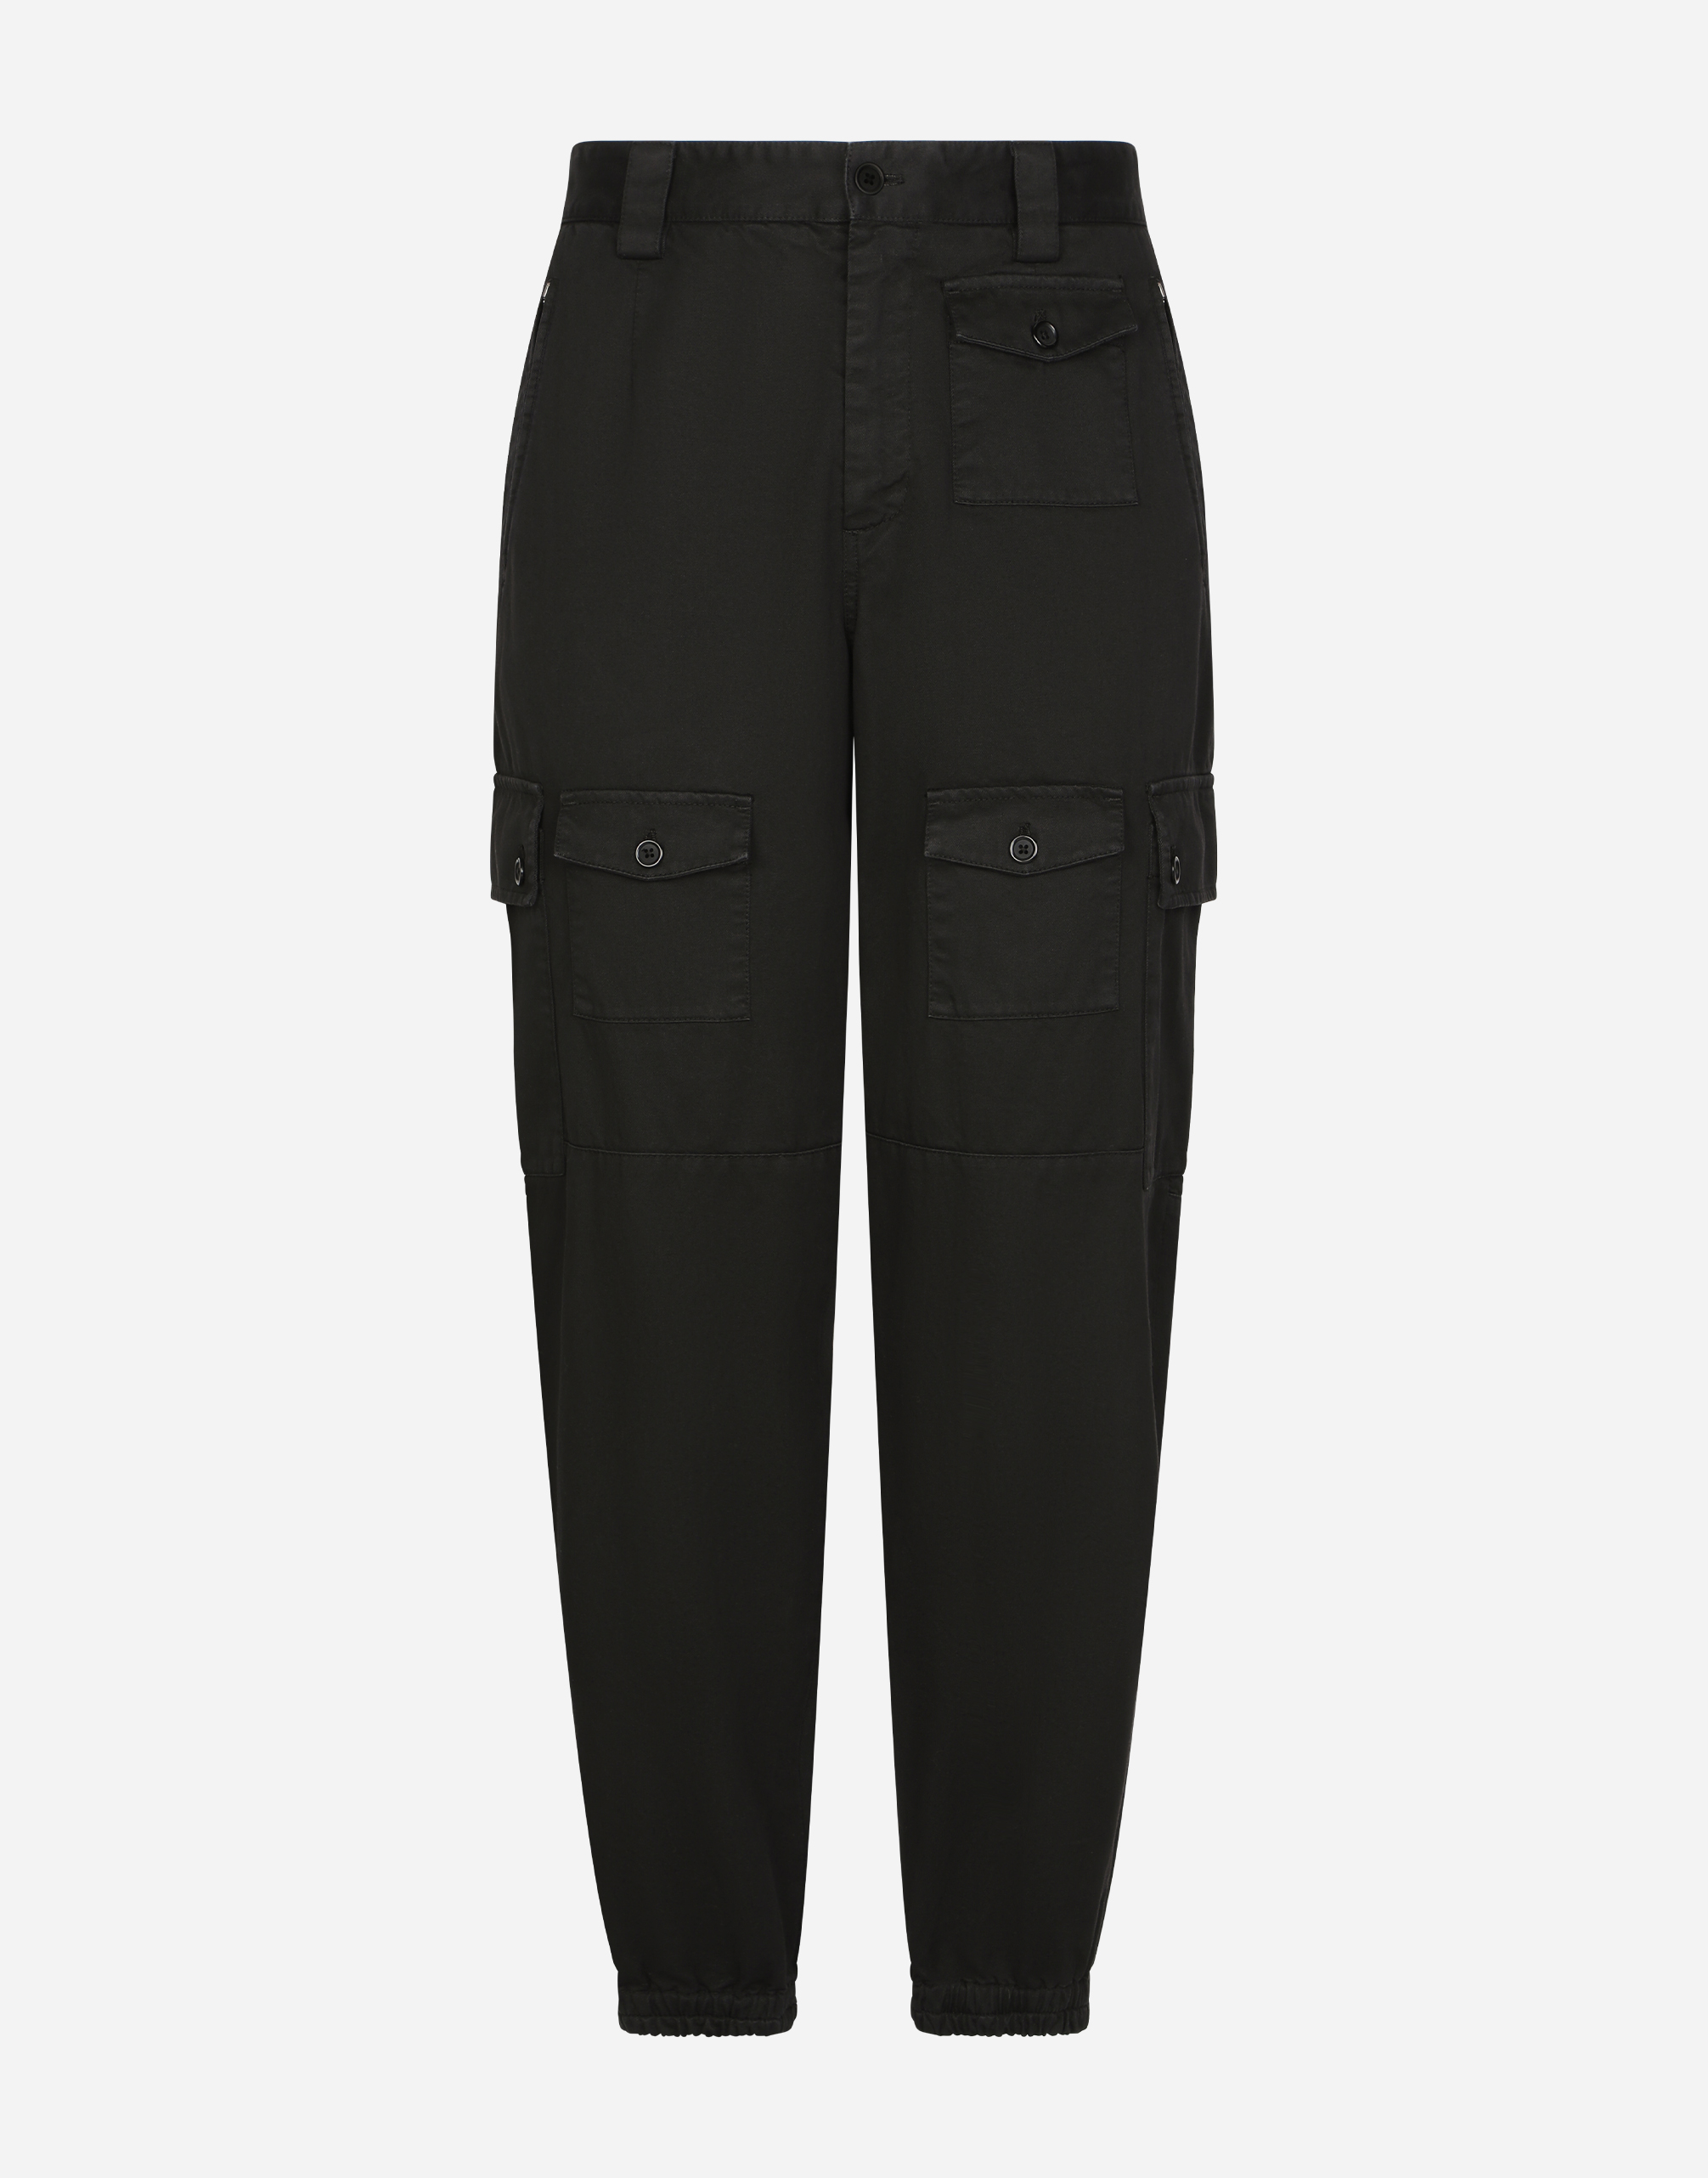 Garment-dyed cotton cargo pants in Black